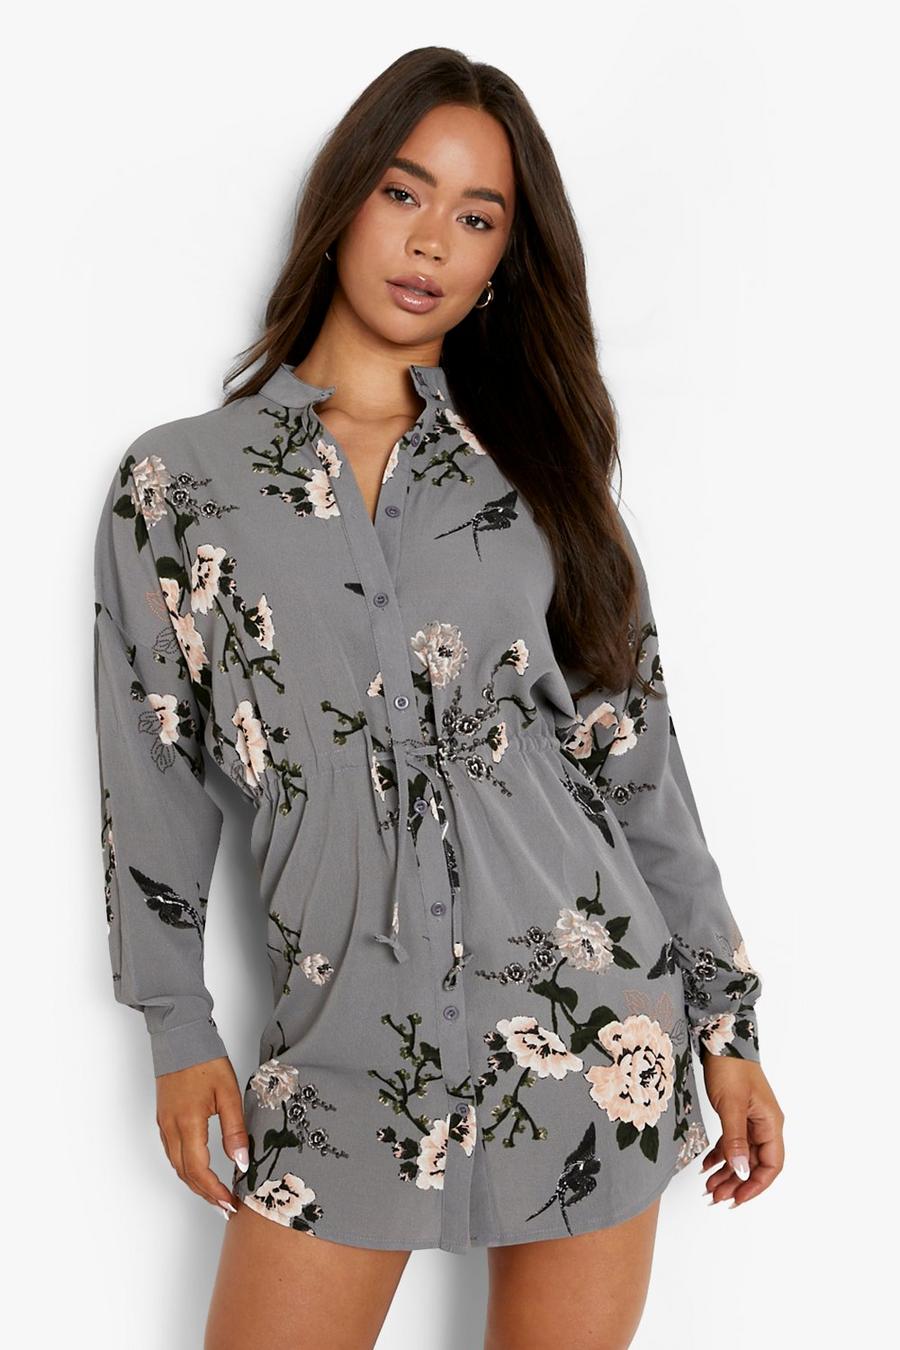 Floral Women's Tops & Dressy Tops